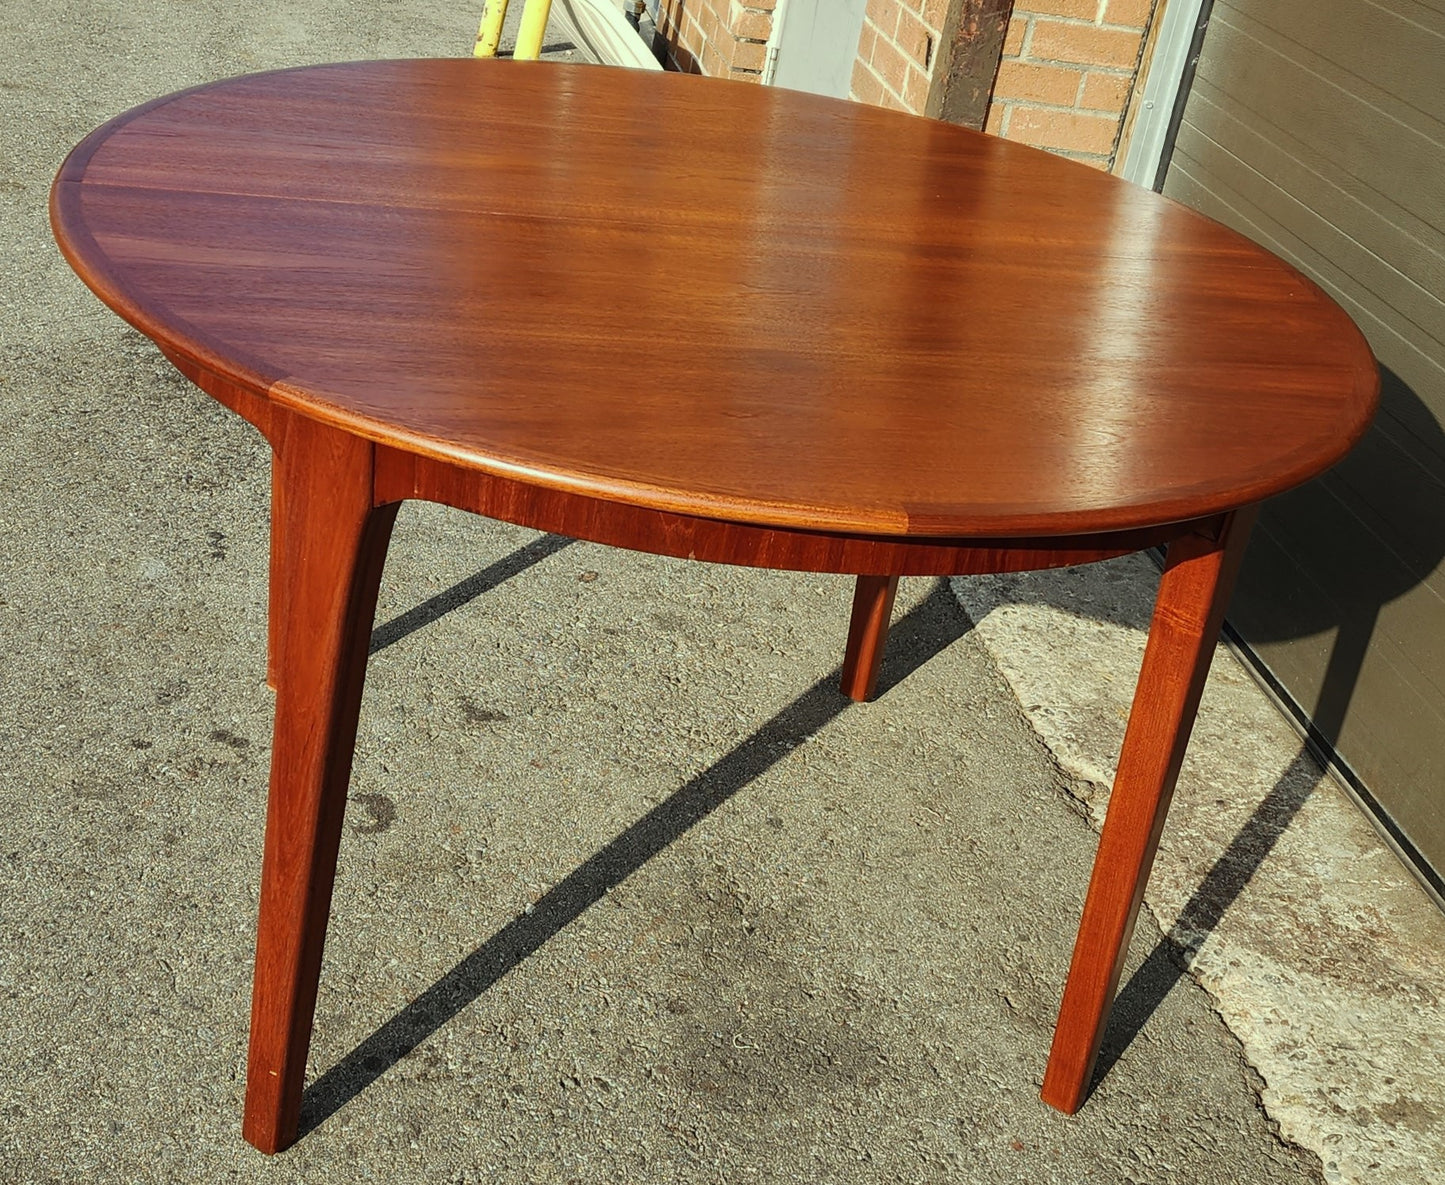 REFINISHED Mid Century Modern Teak Dining Table Round w 2 Leaves 49"- 91"